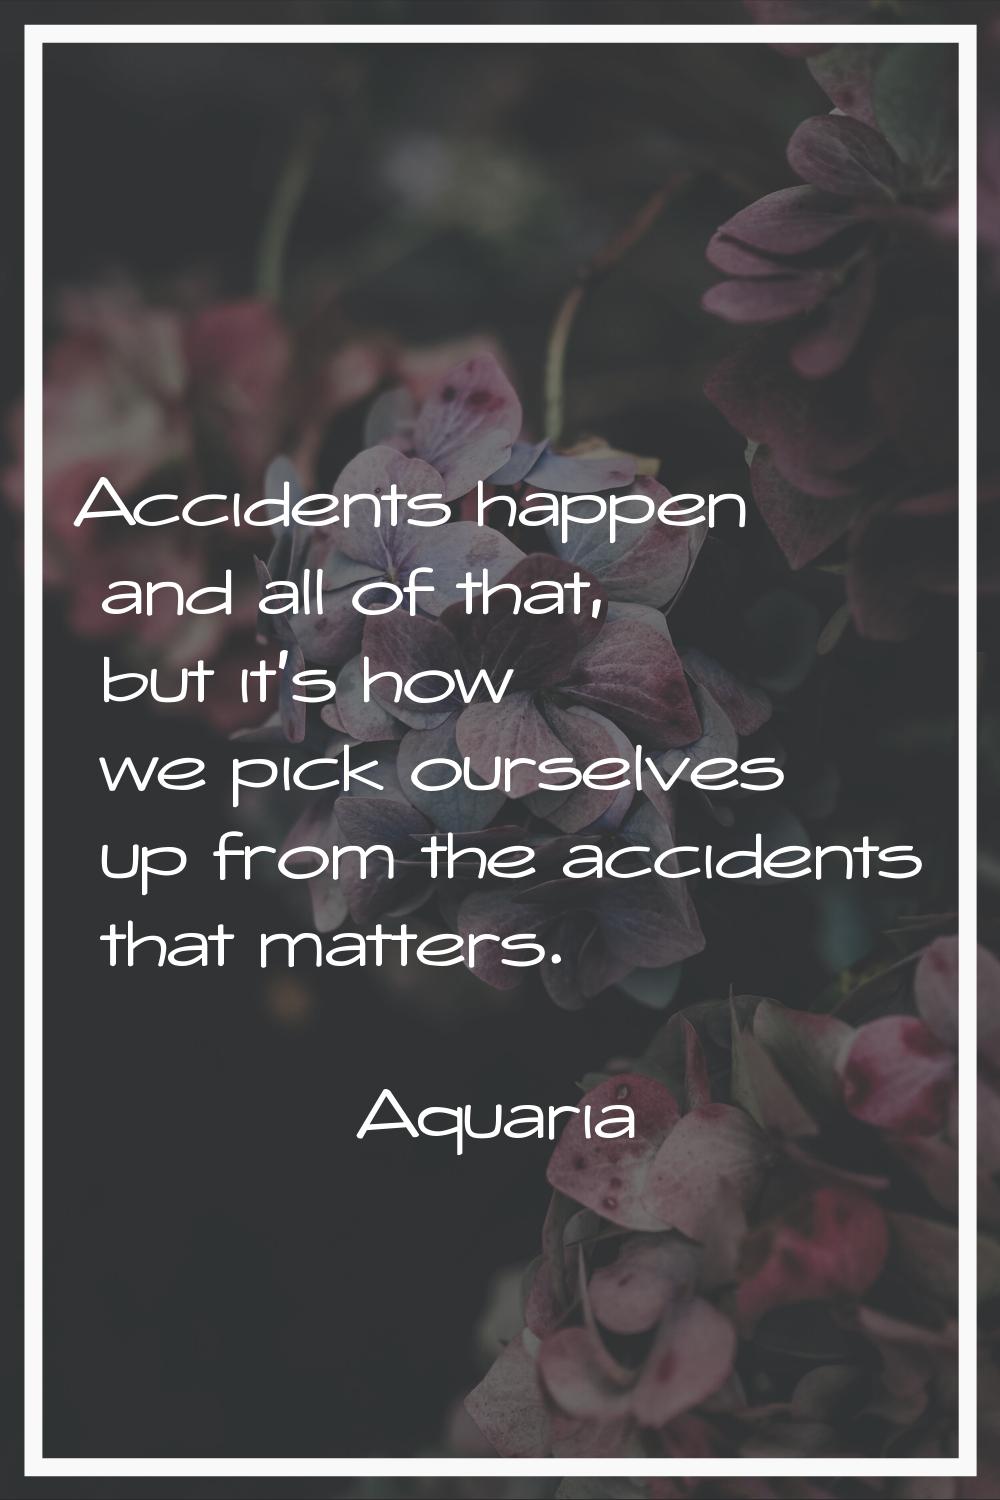 Accidents happen and all of that, but it's how we pick ourselves up from the accidents that matters